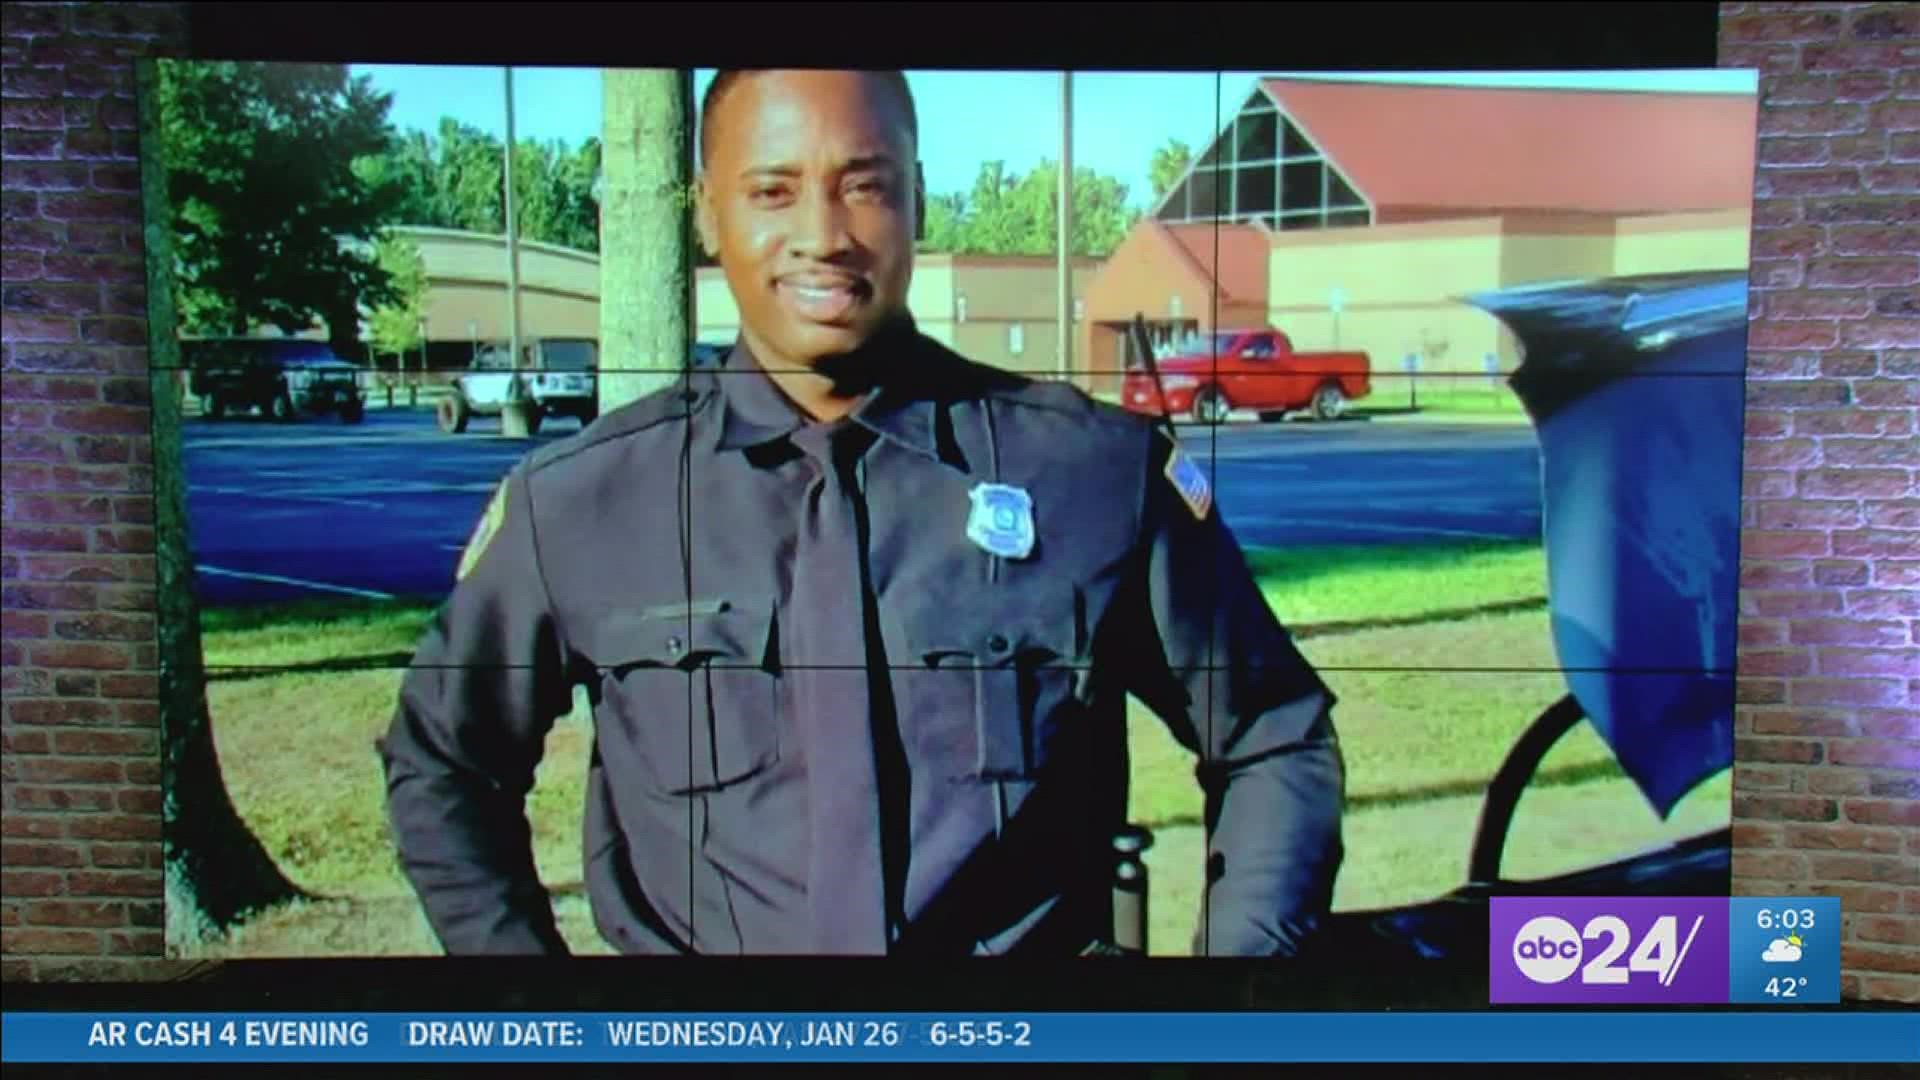 The 32 year-old father of two was laid to rest Thursday in Cordova